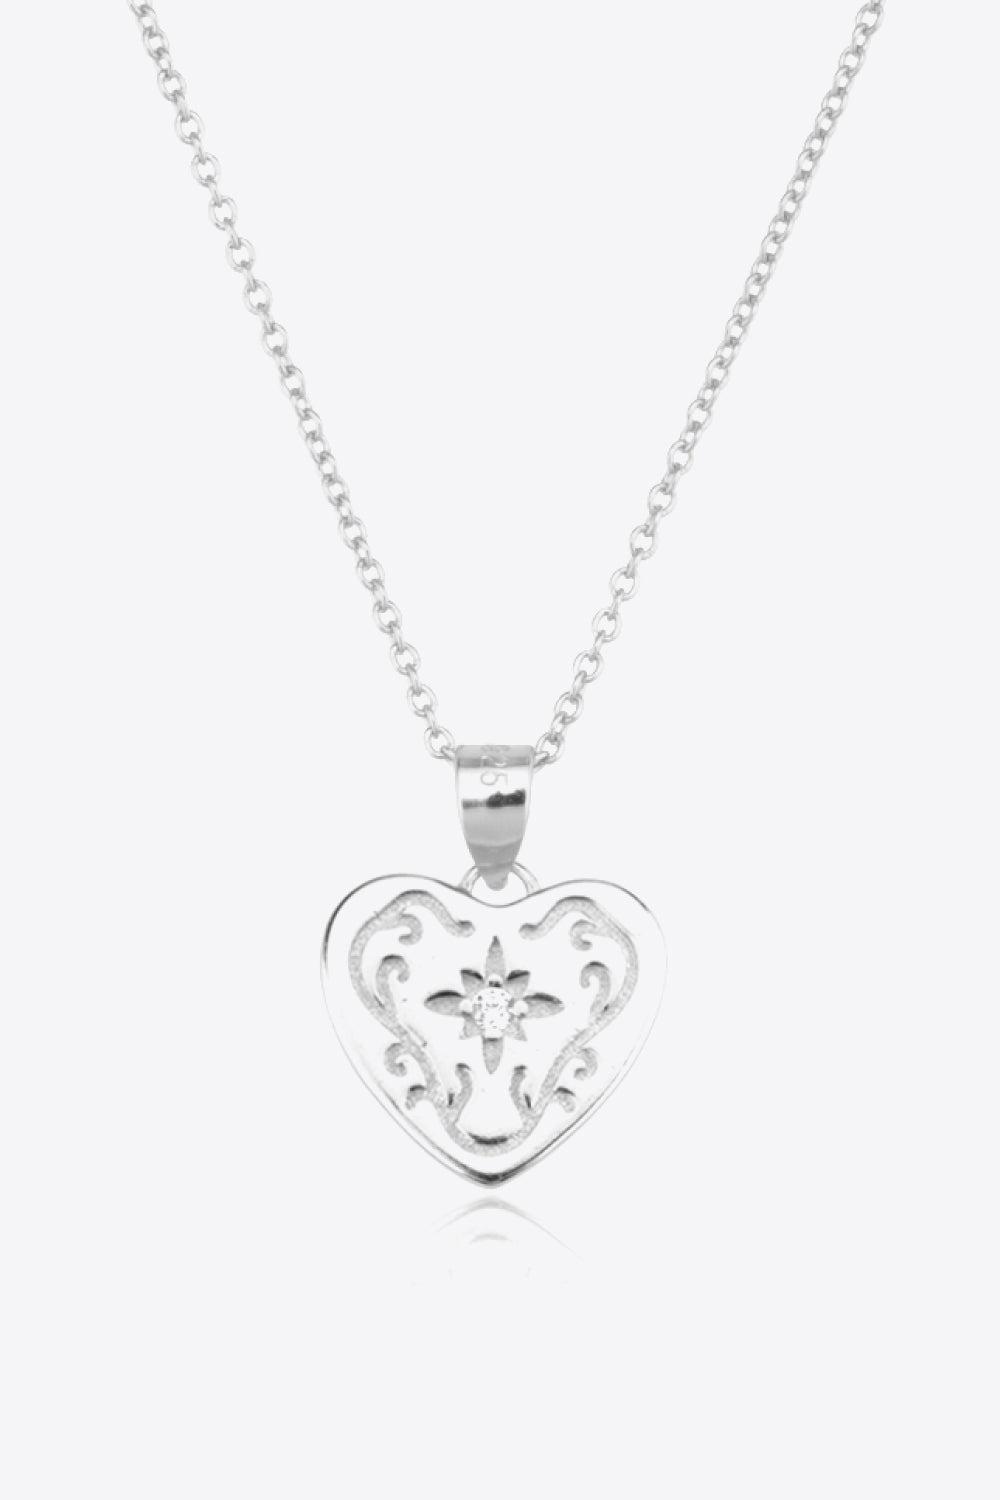 Heart Pendant 925 Sterling Silver Necklace - Guy Christopher